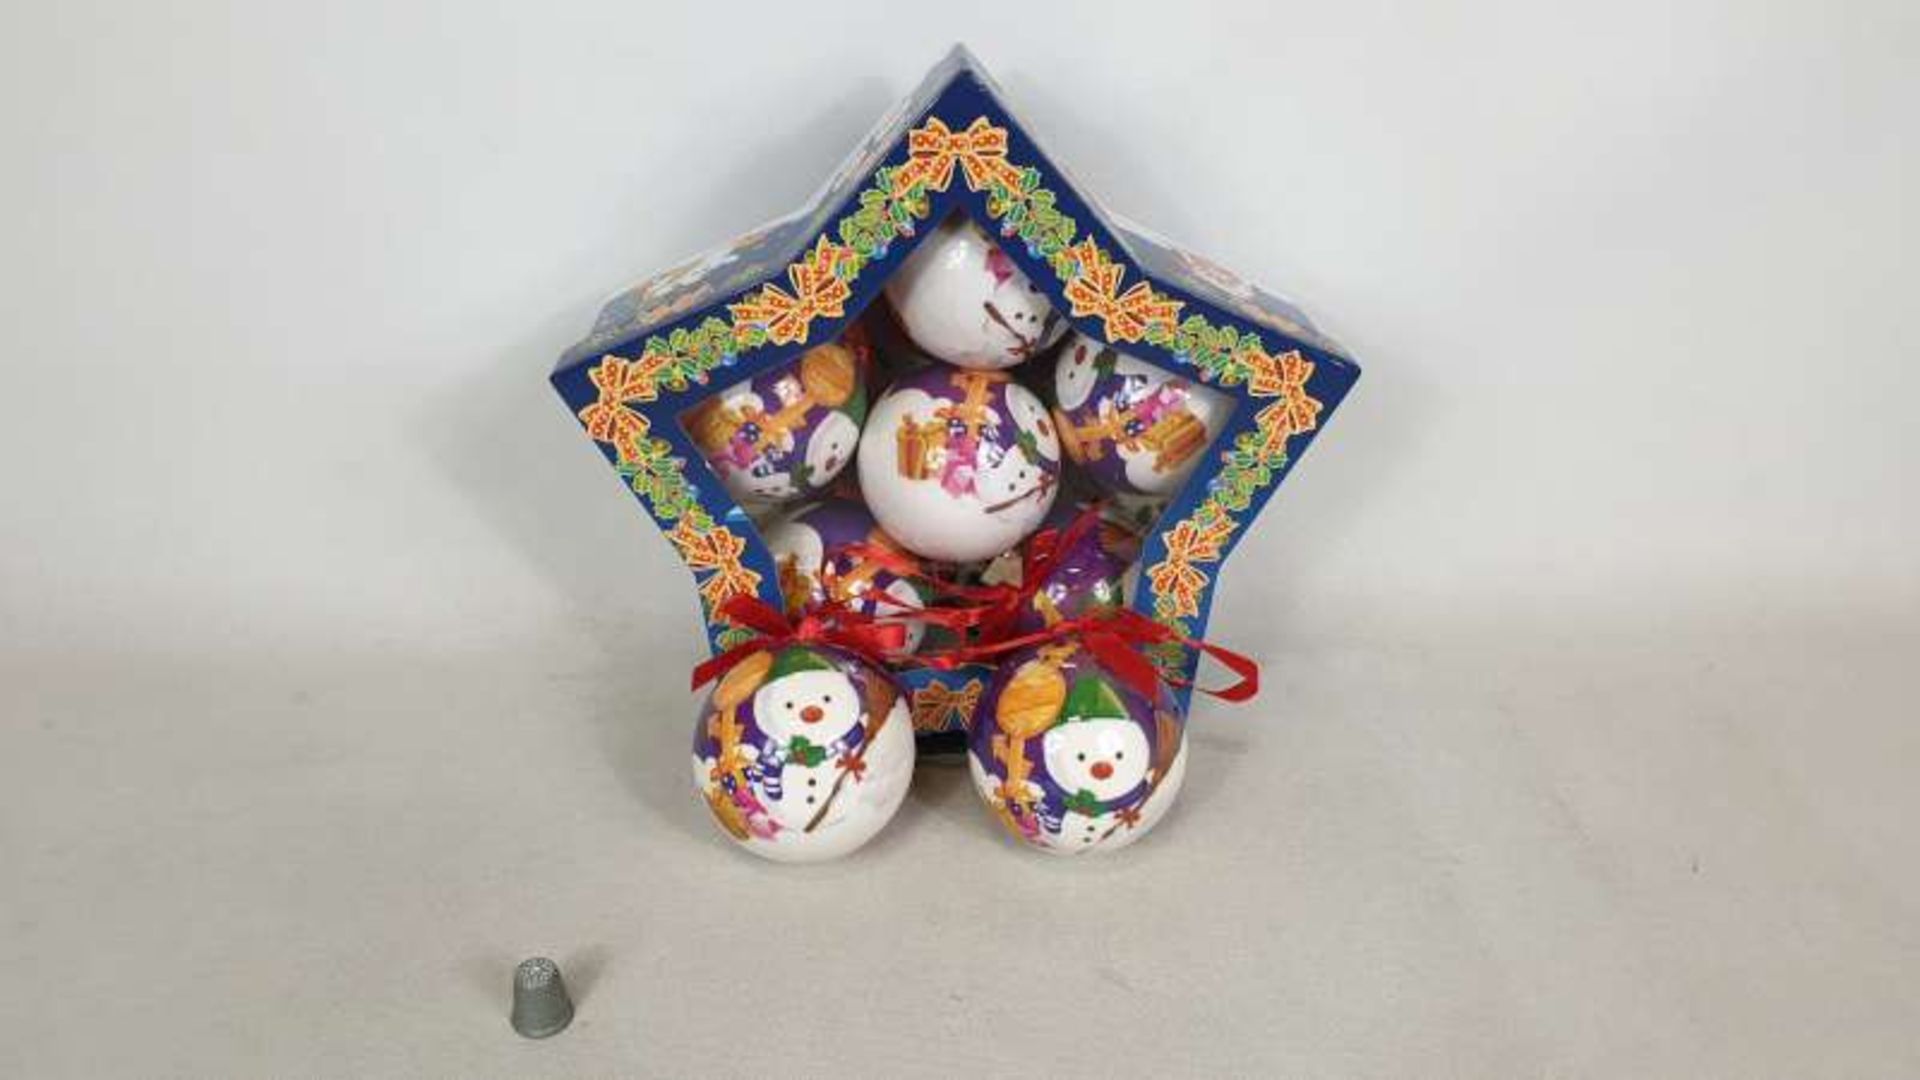 48 X SETS OF 6 SNOWMAN CHRISTMAS TREE BAUBLES IN DECORATIVE STAR BOX IN 3 BOXES